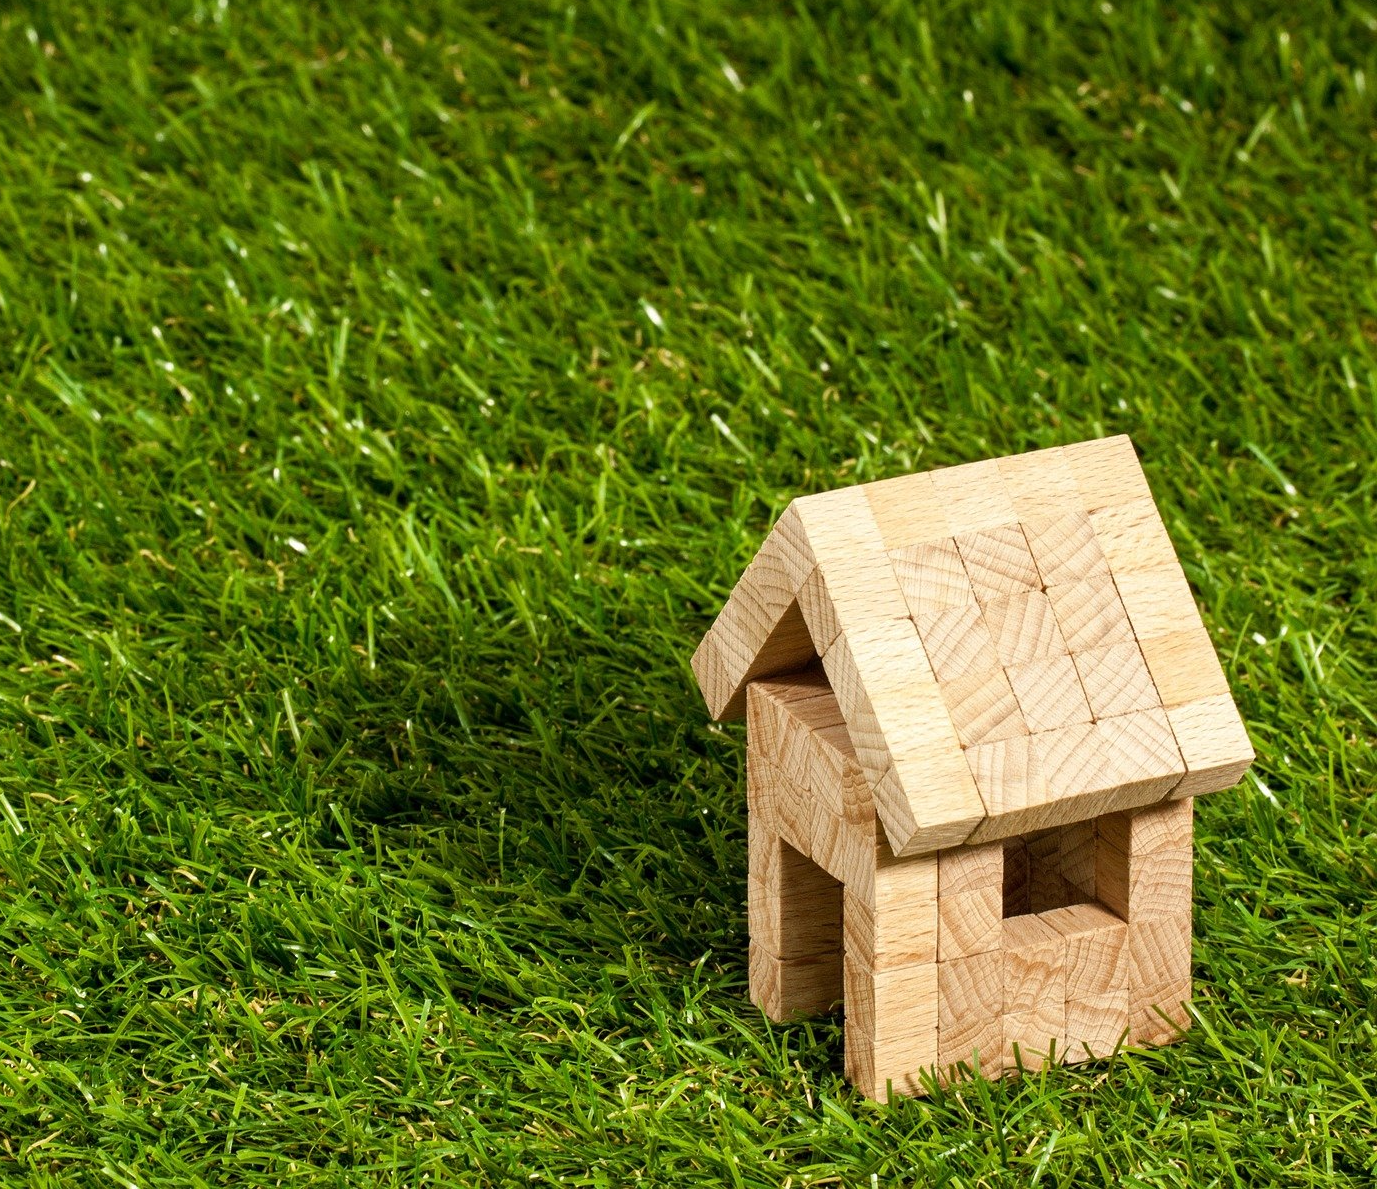 A small, simple model of a wooden house with a gabled roof sits on vibrant artificial grass, reminiscent of the installations in Tempe AZ. The house is made from square wooden blocks, giving it a minimalist and handcrafted appearance. The lush grass is evenly spread in the background.